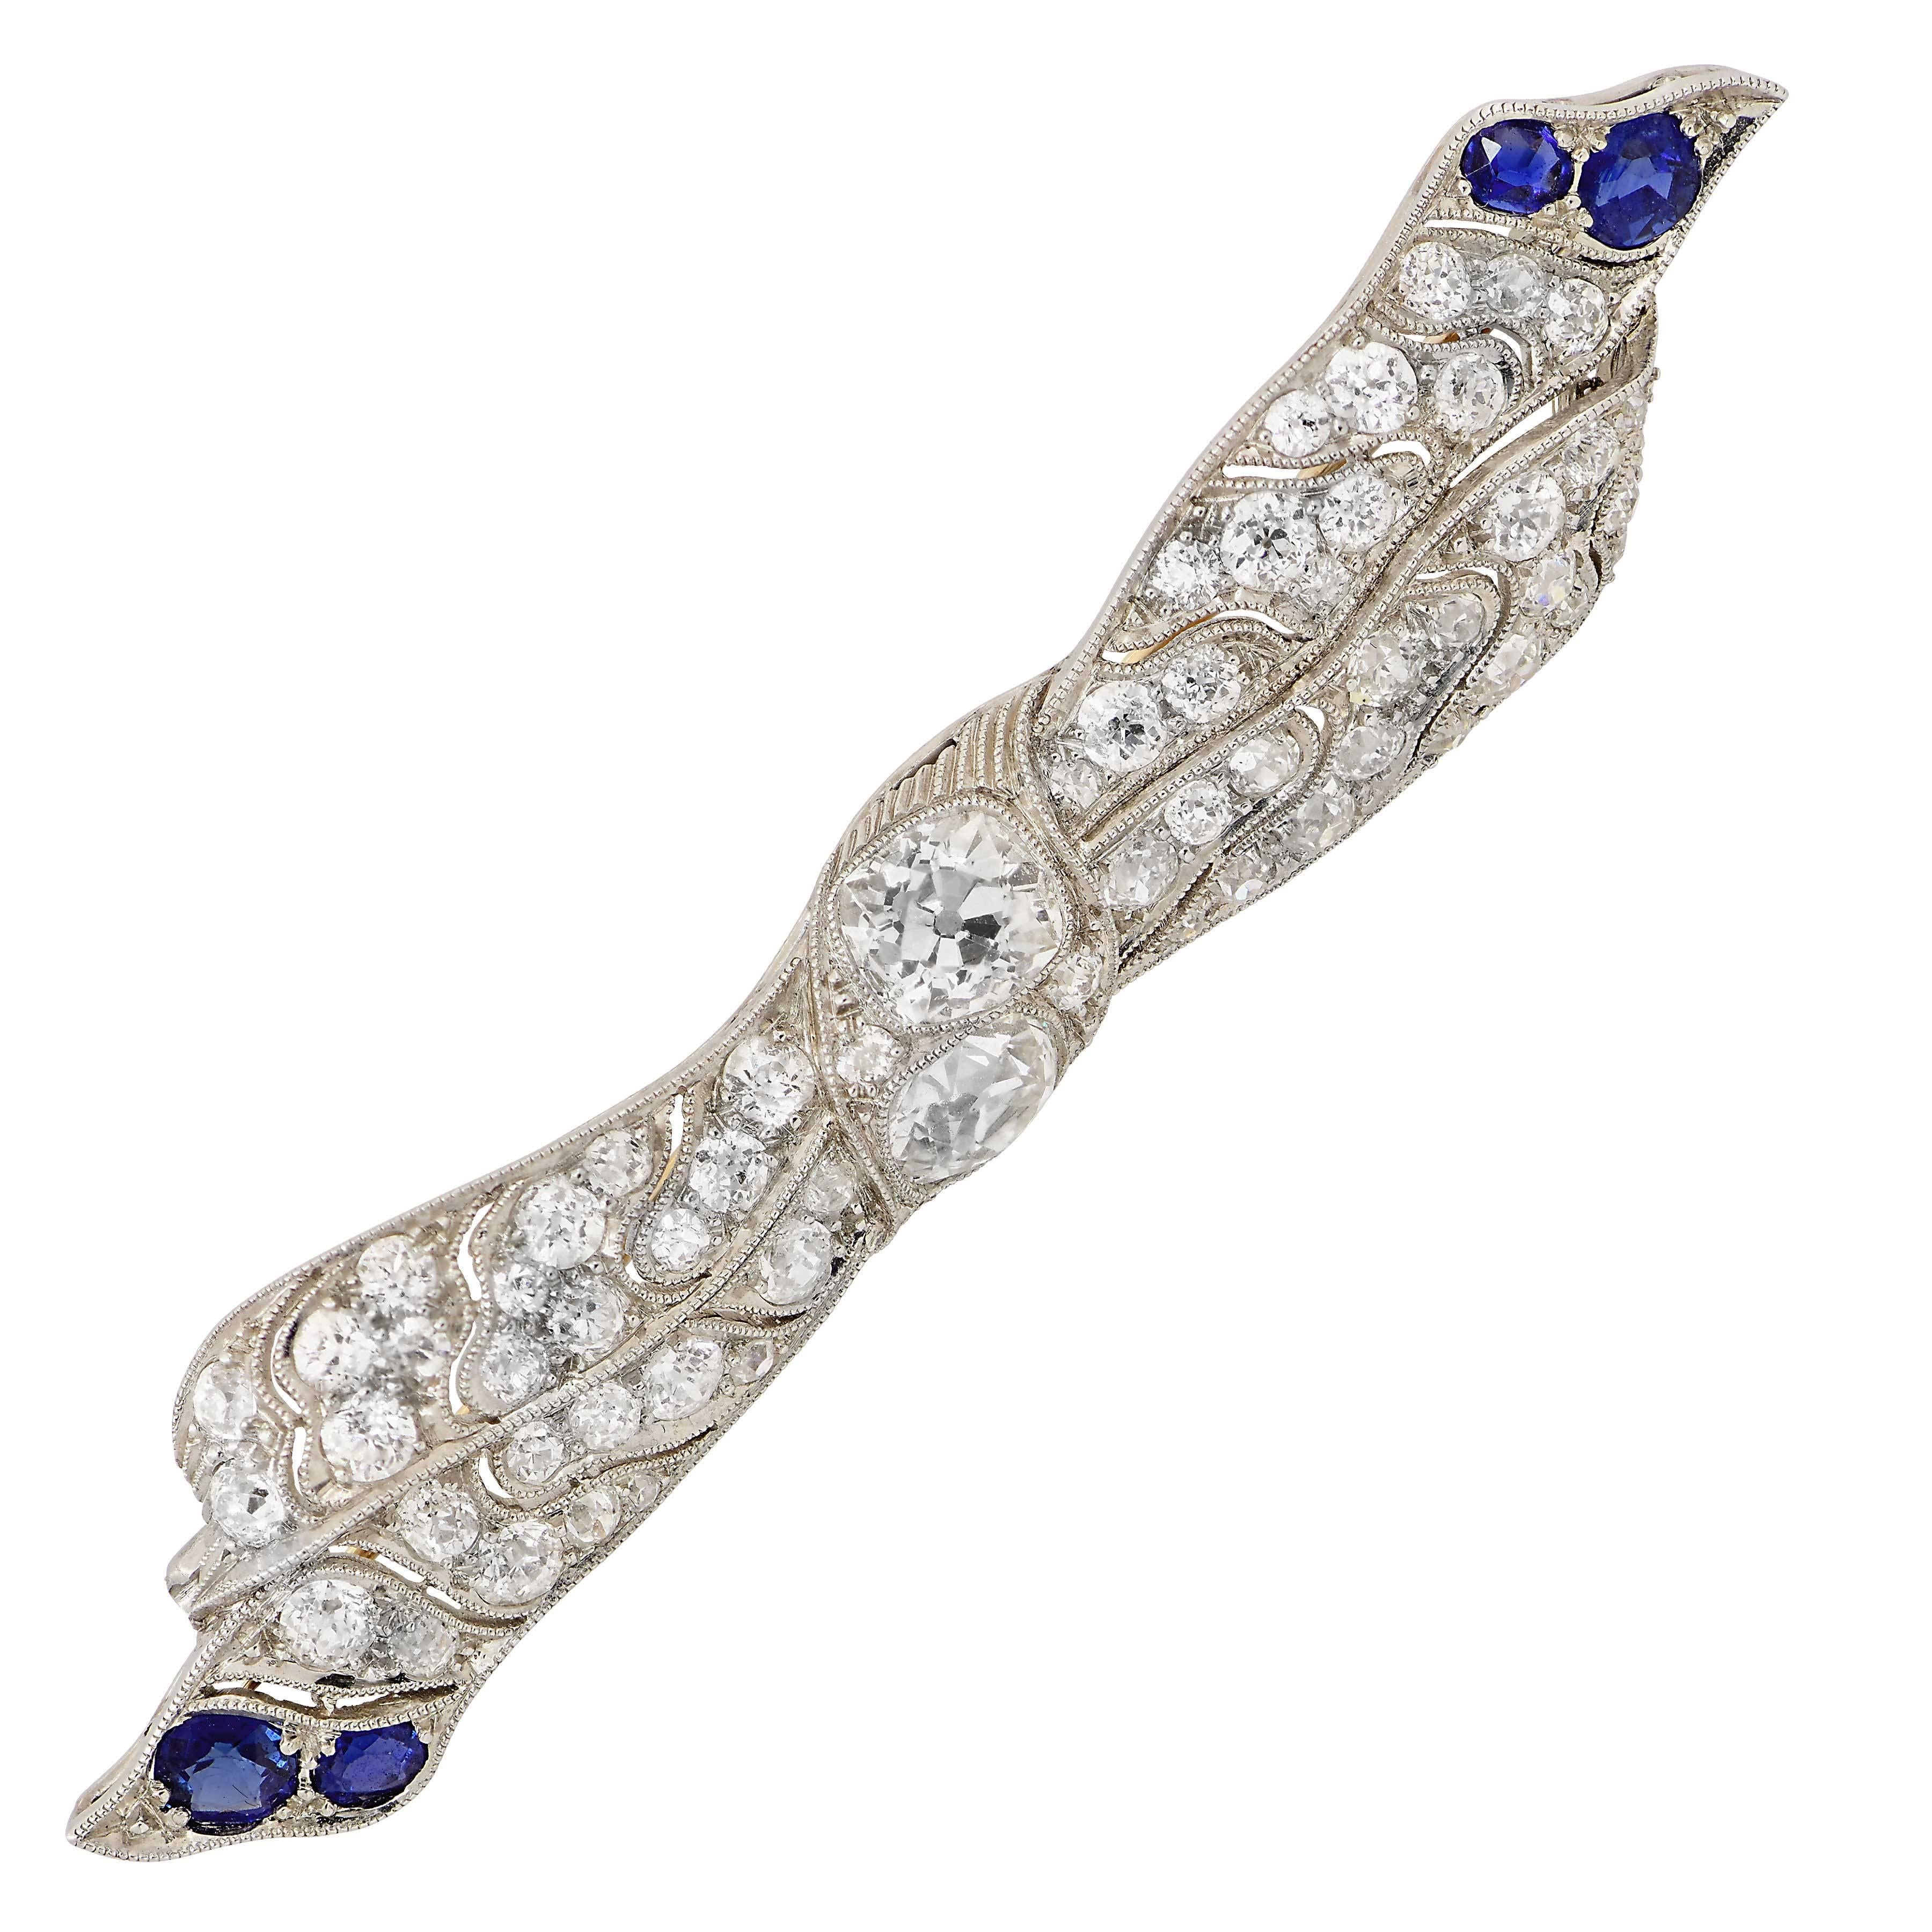 This beautiful antique Edwardian Ribbon Platinum pendant and  brooch features 64 old mine cut diamonds with an estimated total weight of 5 carats and four oval cut sapphires with an estimated total weight of 1.5 carats. Center two old mine cut